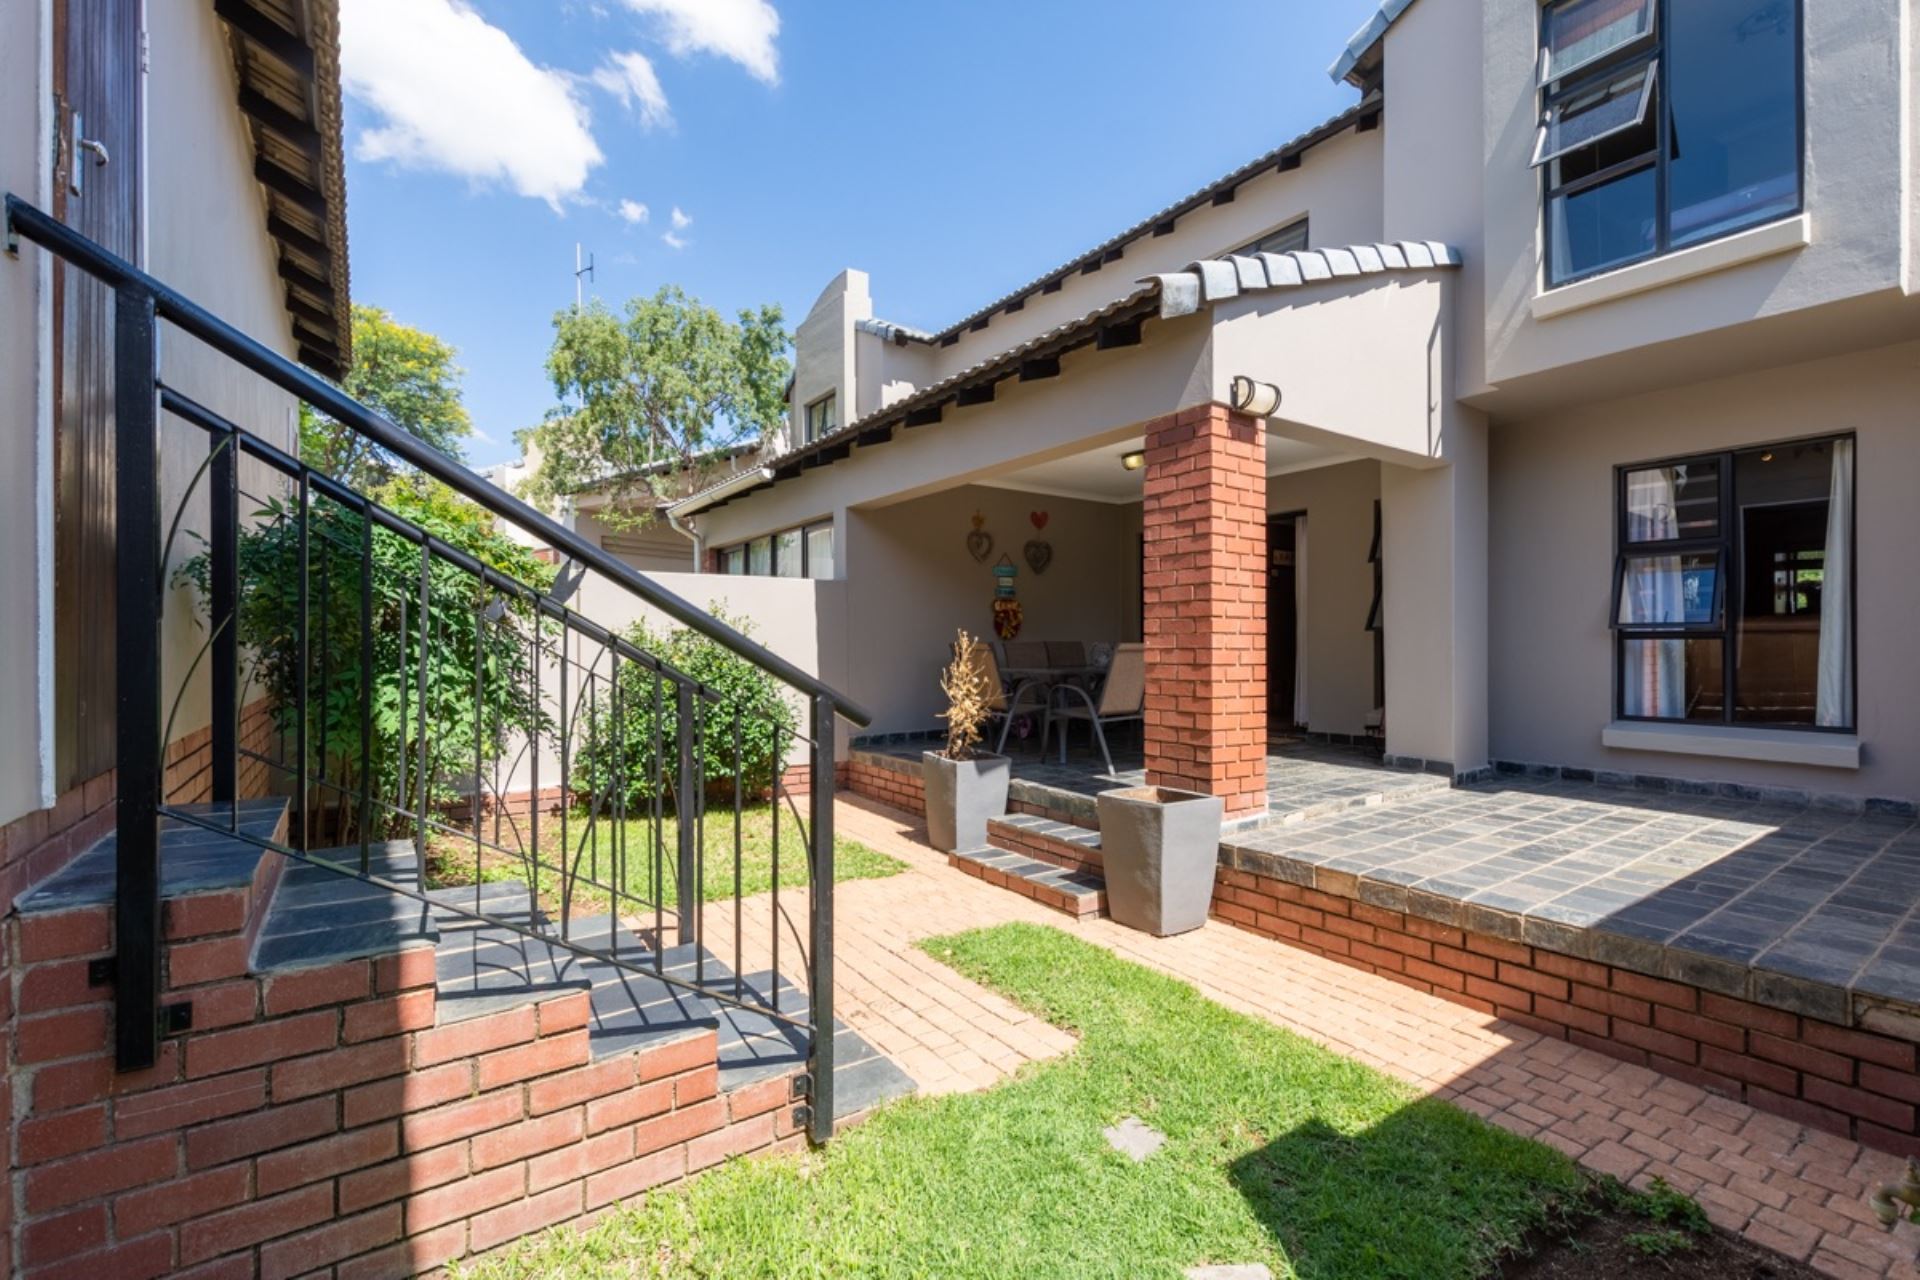 Fourways House For Sale in FOURWAYS SANDTON was listed 